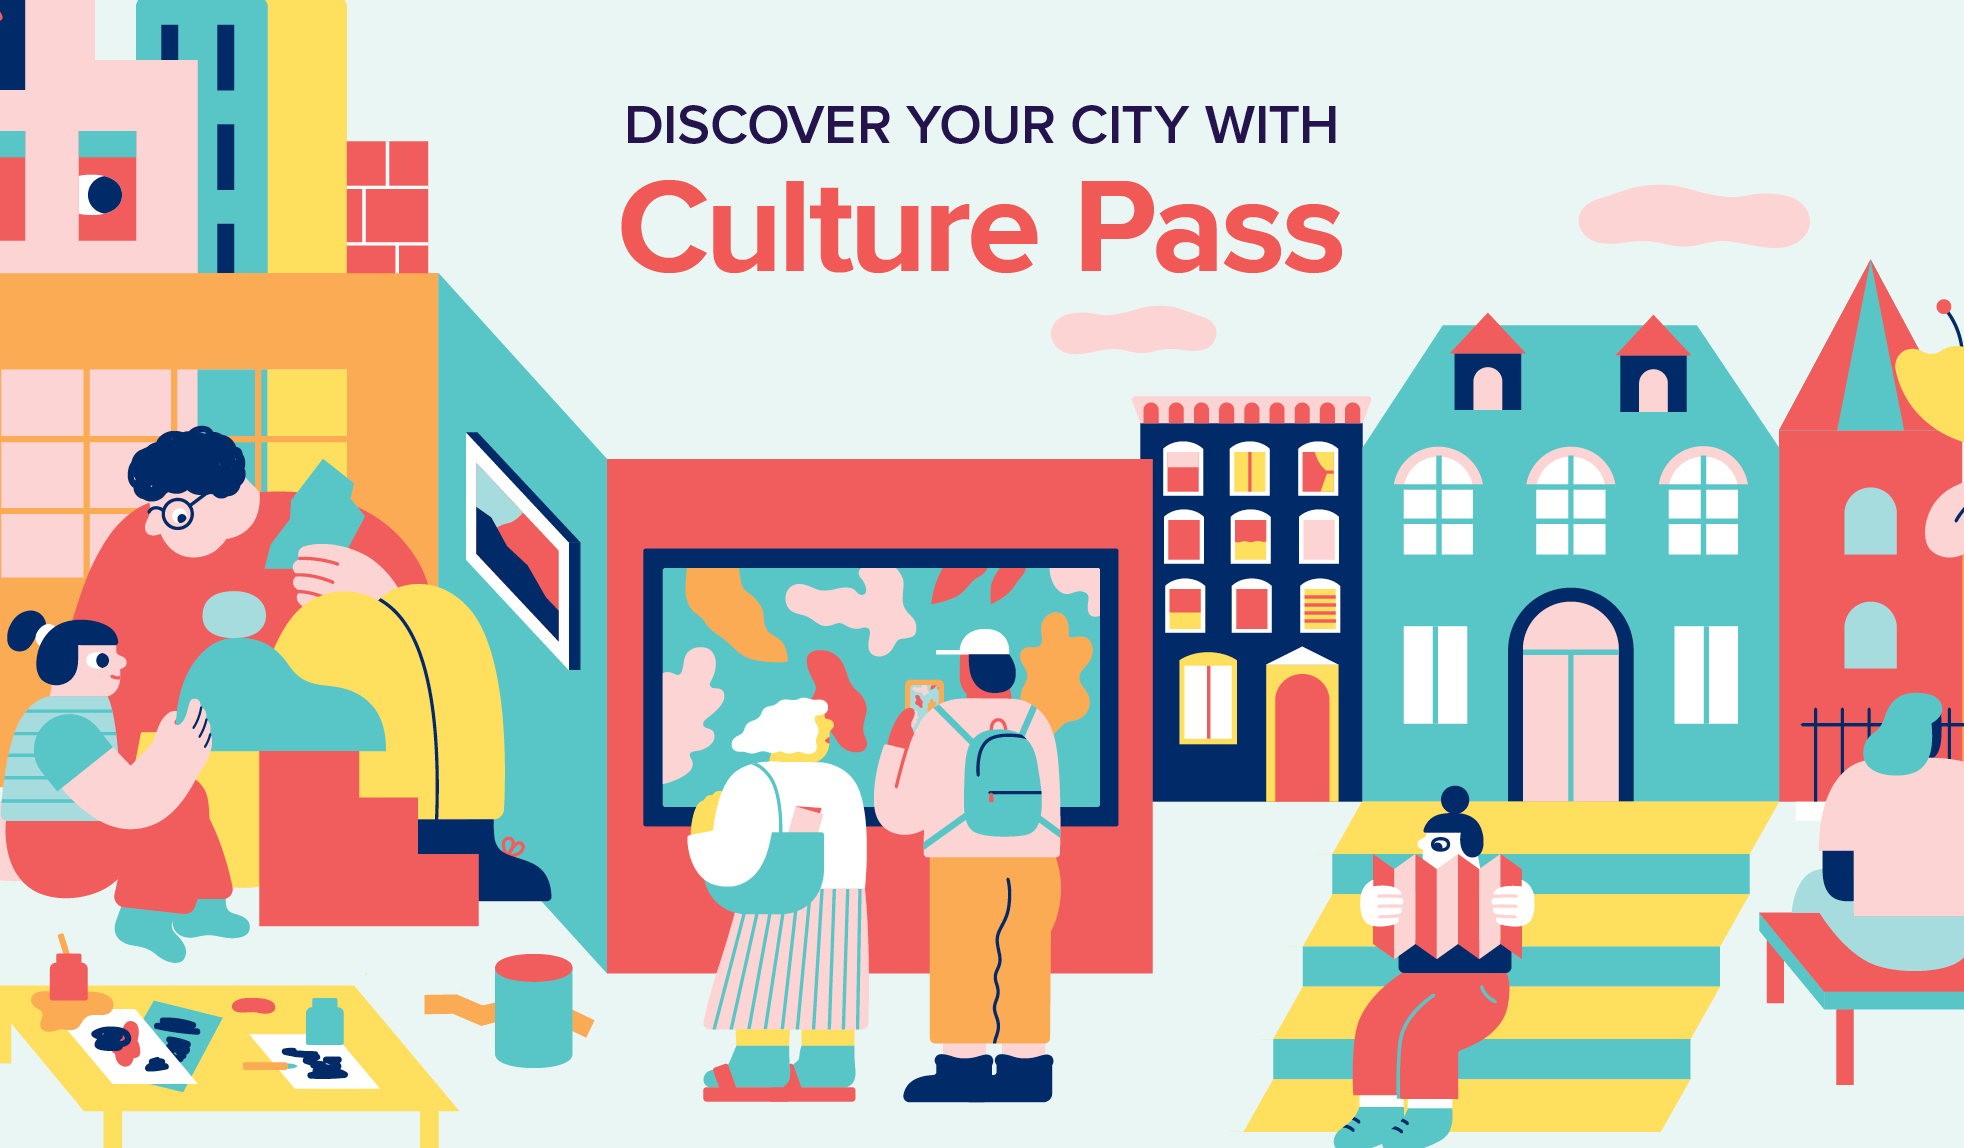 Use your library card to get your FREE passes to more than 80 museums, theaters, and more!